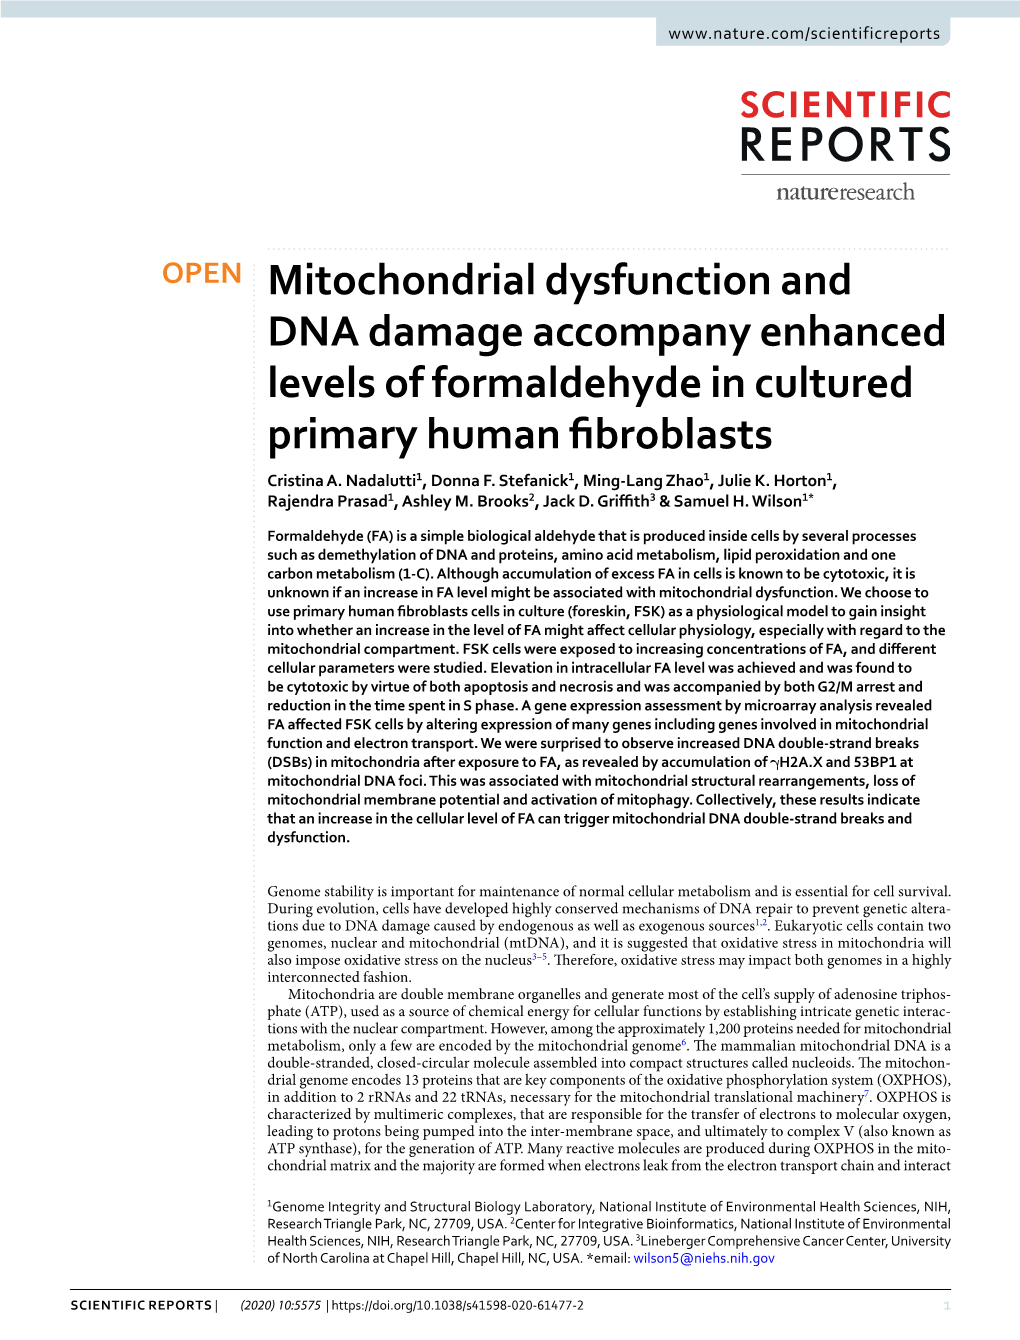 Mitochondrial Dysfunction and DNA Damage Accompany Enhanced Levels of Formaldehyde in Cultured Primary Human Fbroblasts Cristina A